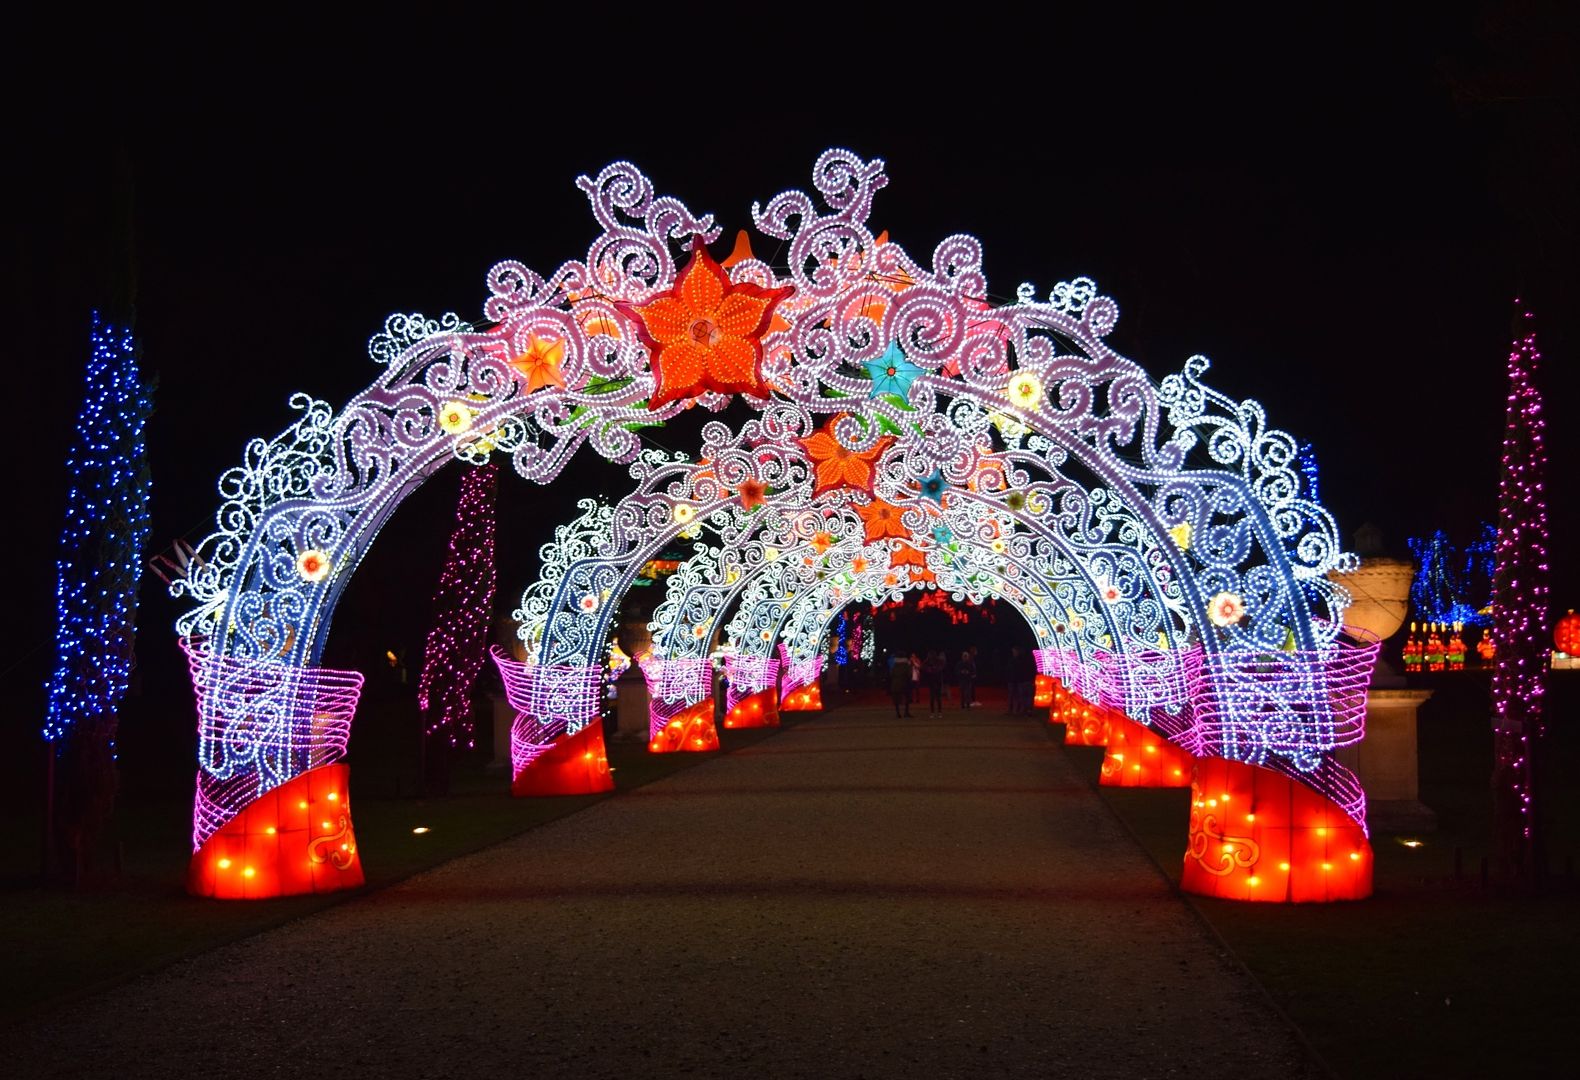 Entrance to Magical Lantern Festival Chiswick | The LDN Diaries